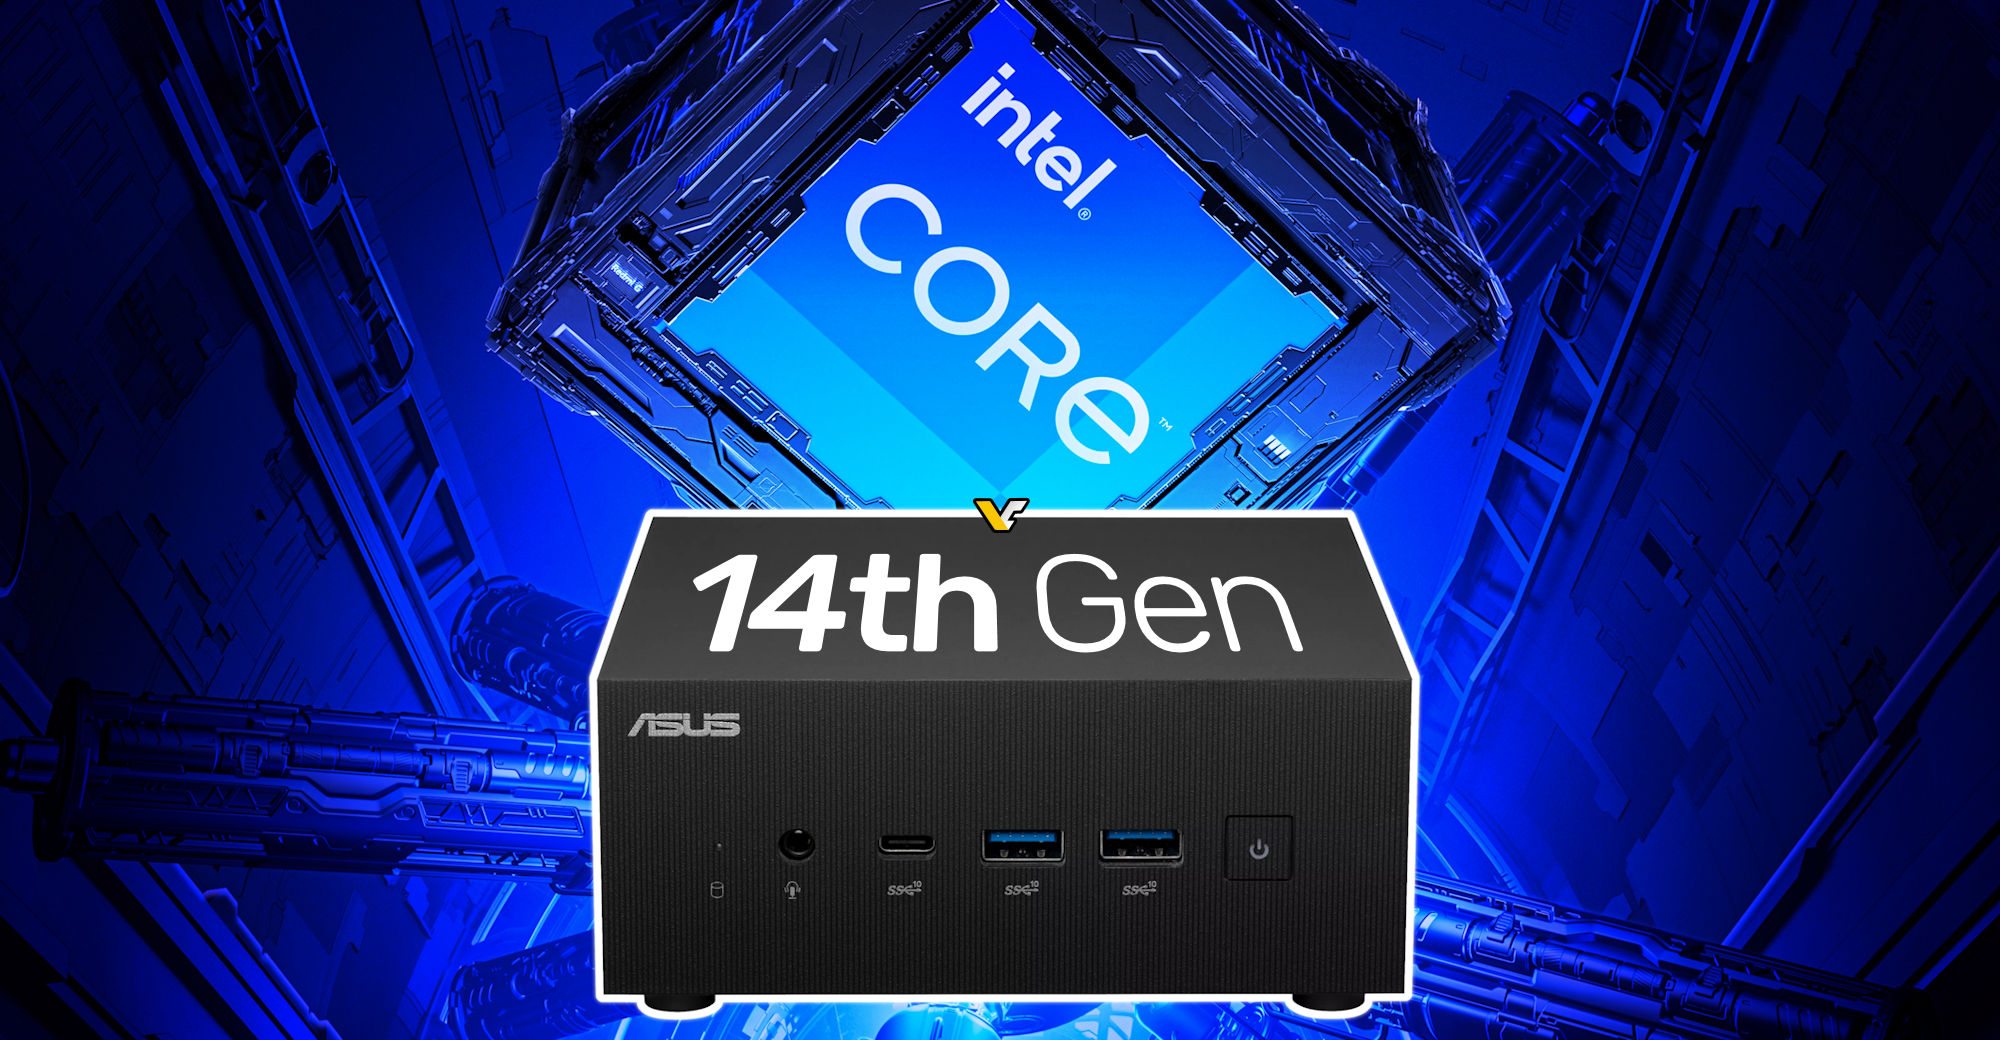 ASUS PN65 is the first Mini-PC with Intel 14th Gen Core CPU